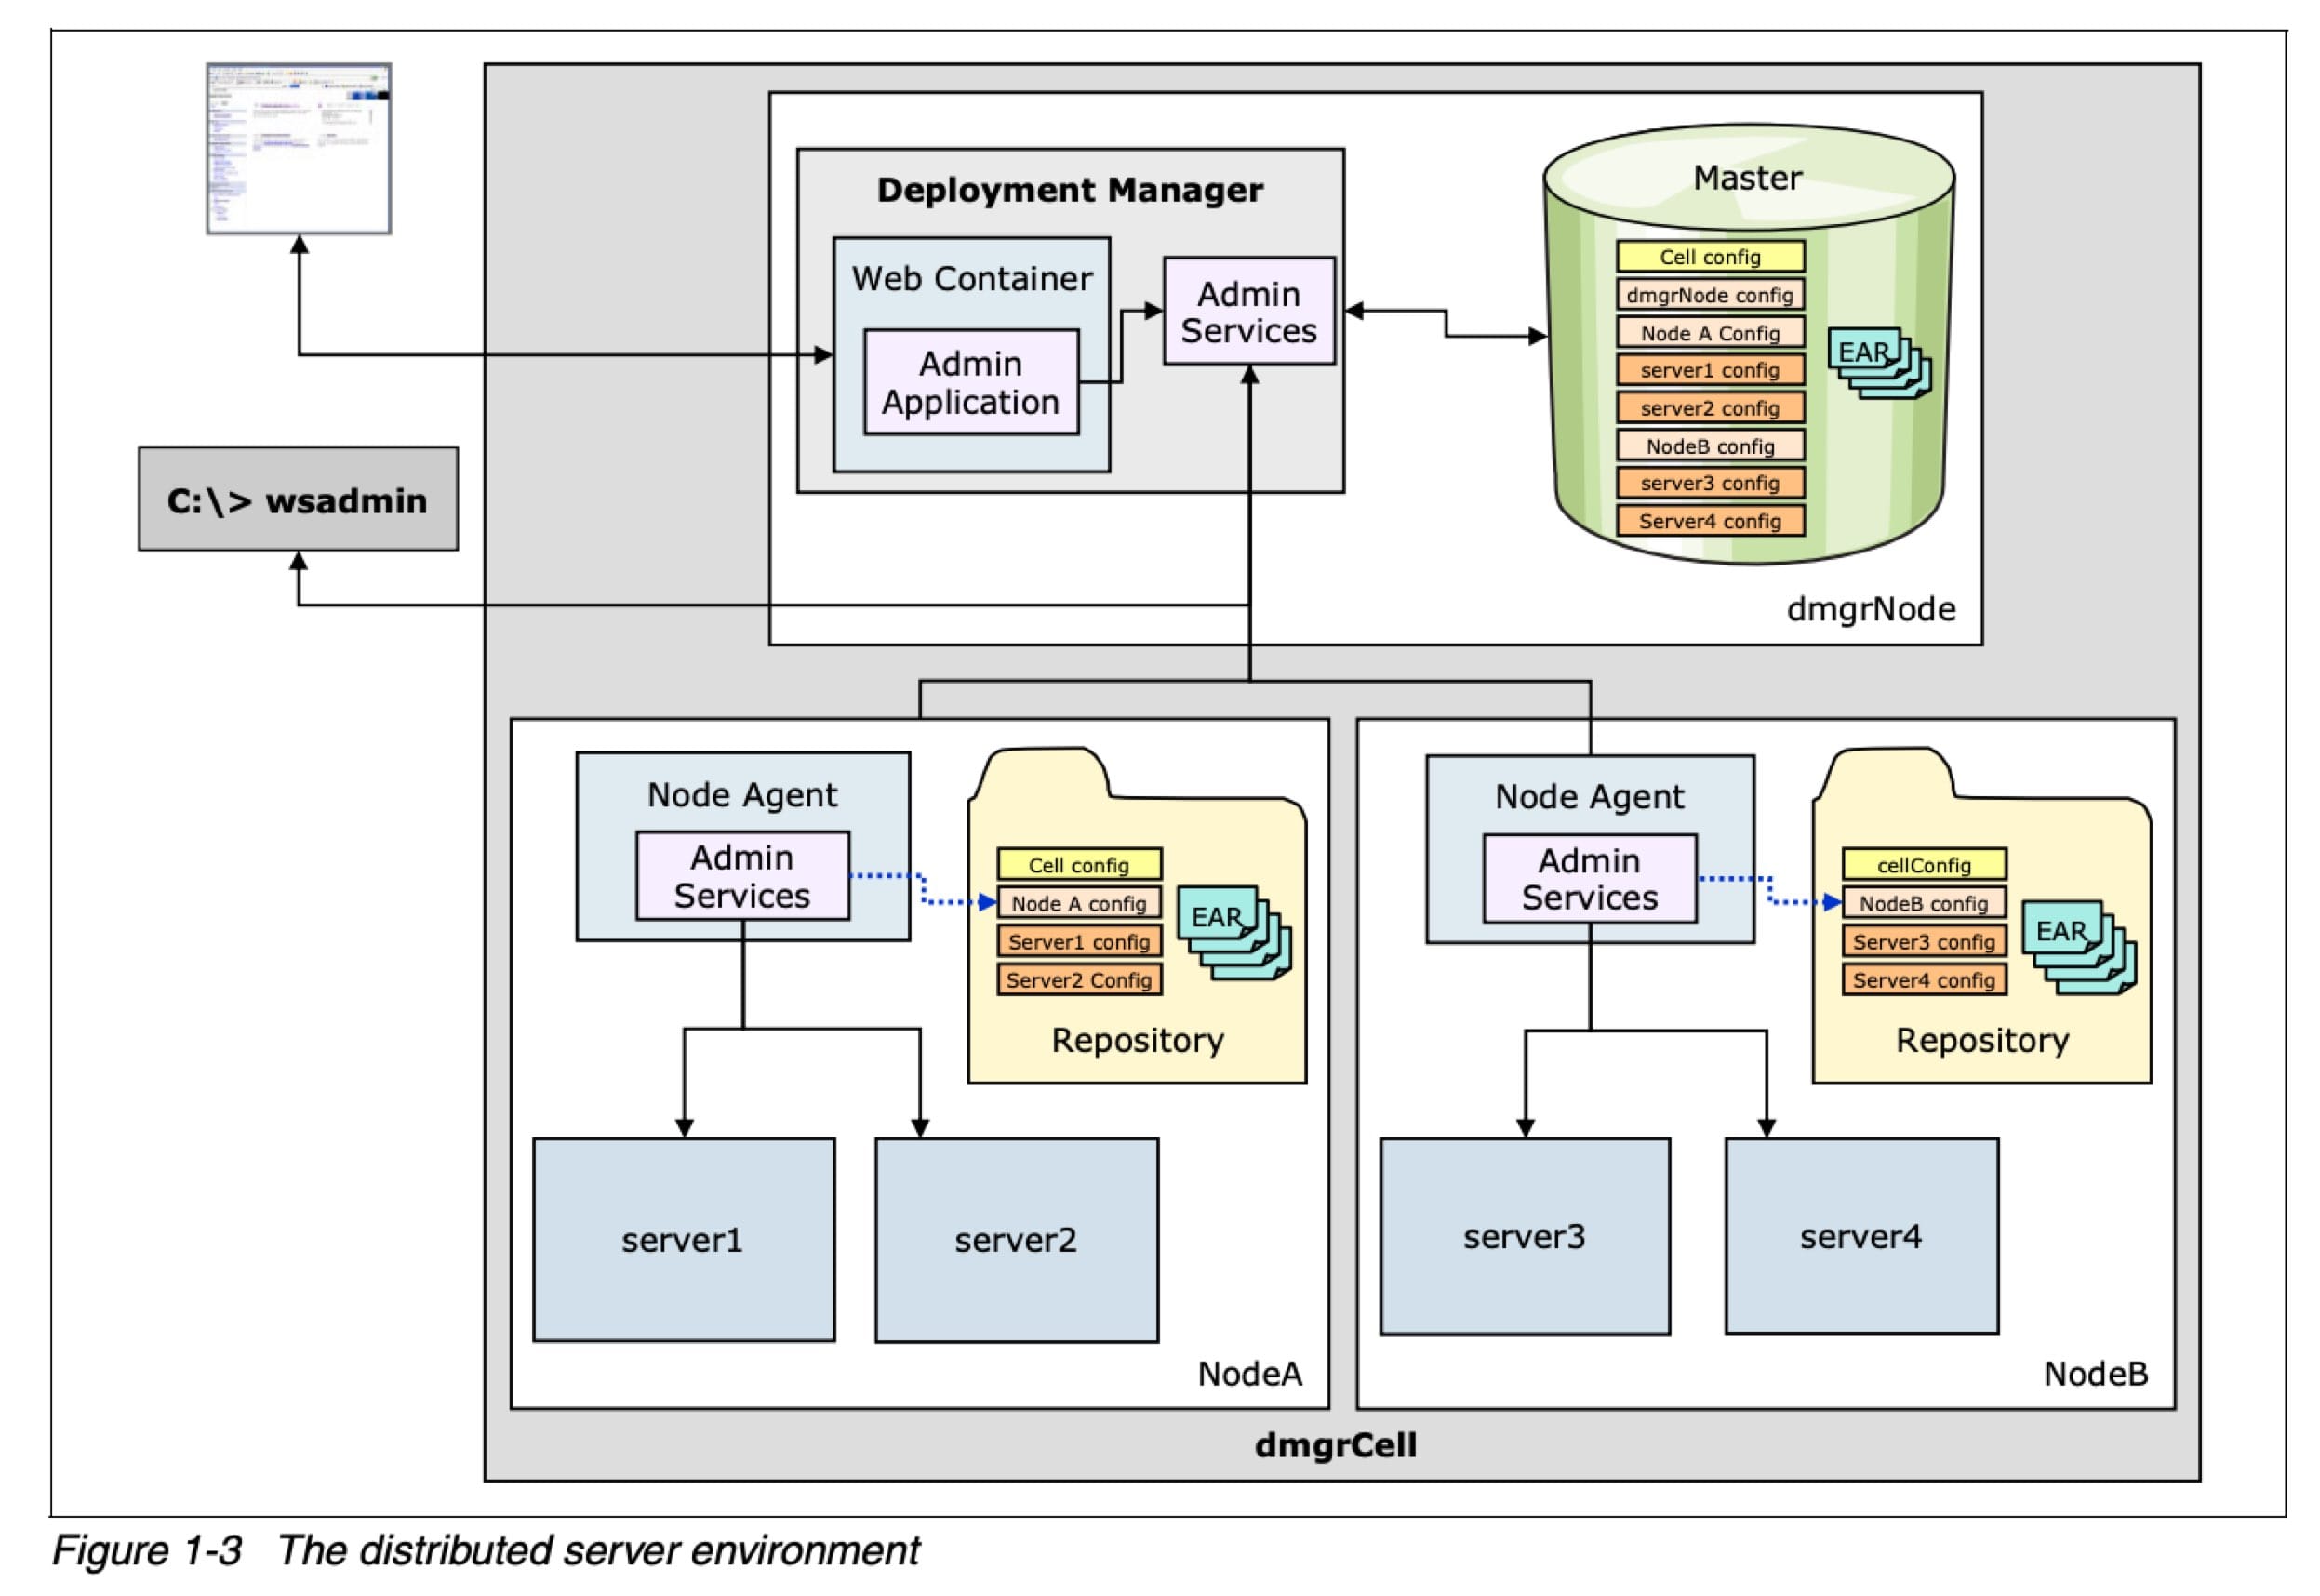 WAS : System management in a distributed server environment